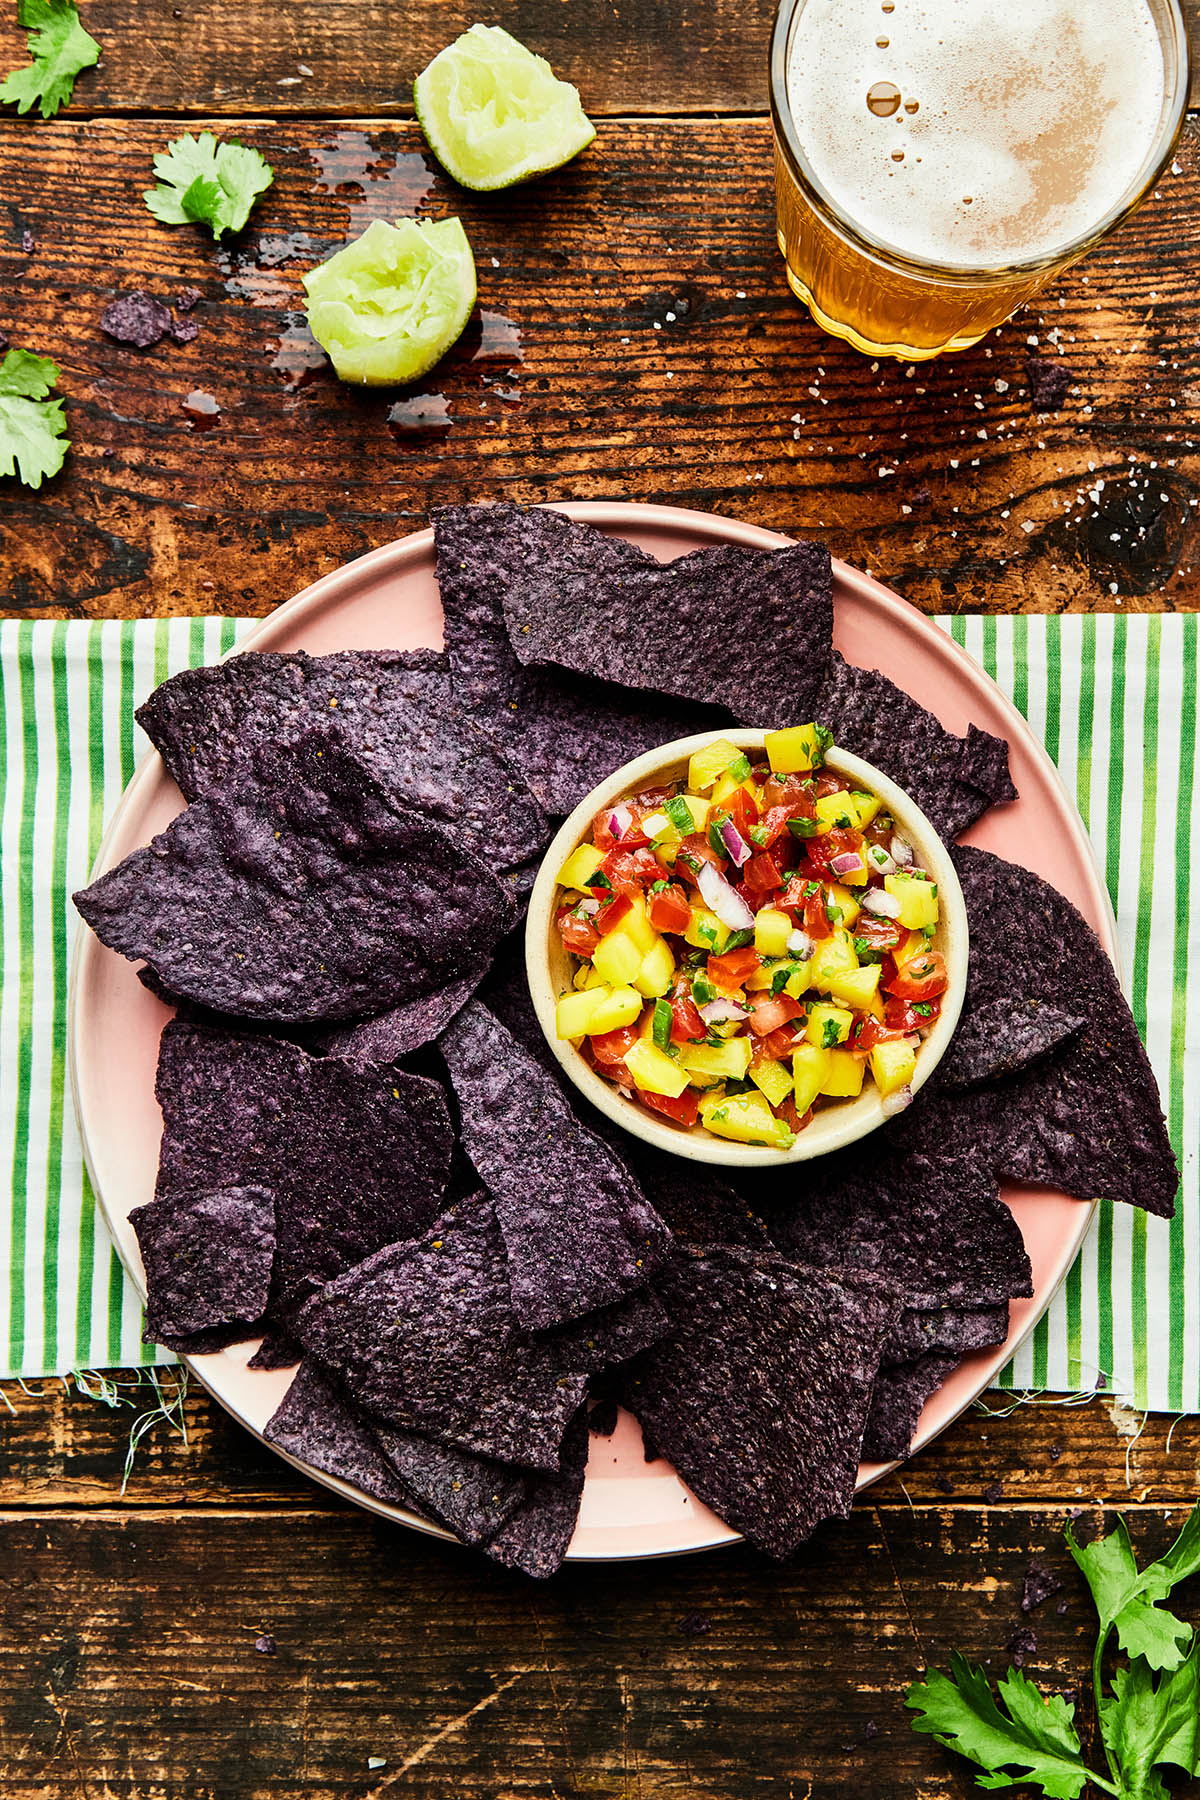 A pink plate with blue corn chips and a small bowl of mango pico de gallo laying on a green and white striped cloth on a wood table with squeezed limes, cilantro leaves, and a glass of beer nearby.